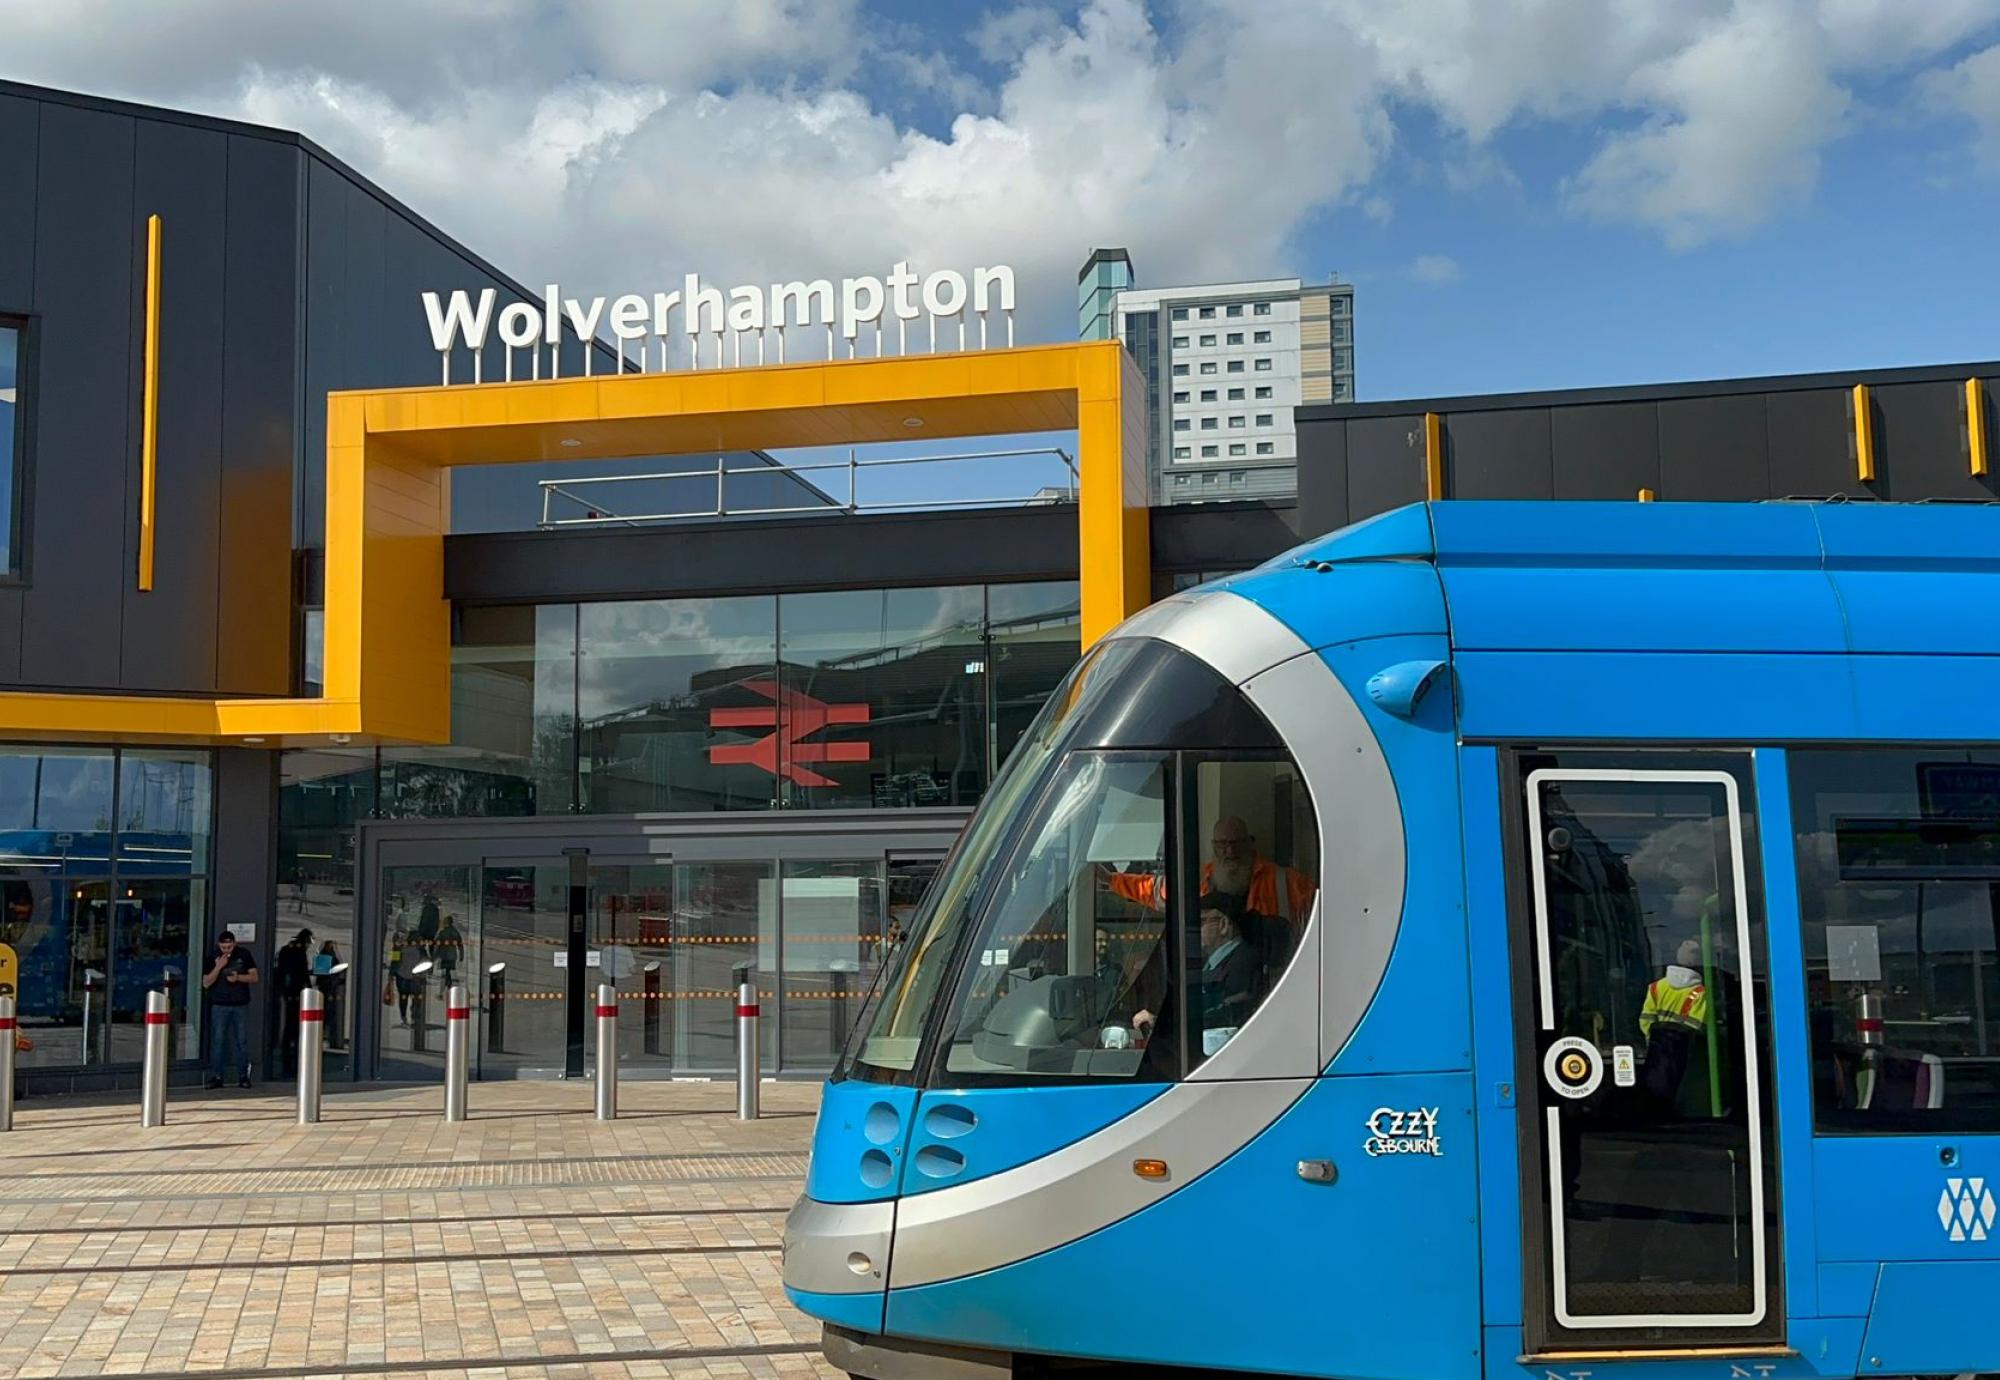 New section of West Midlands Metro extension opens on Sunday